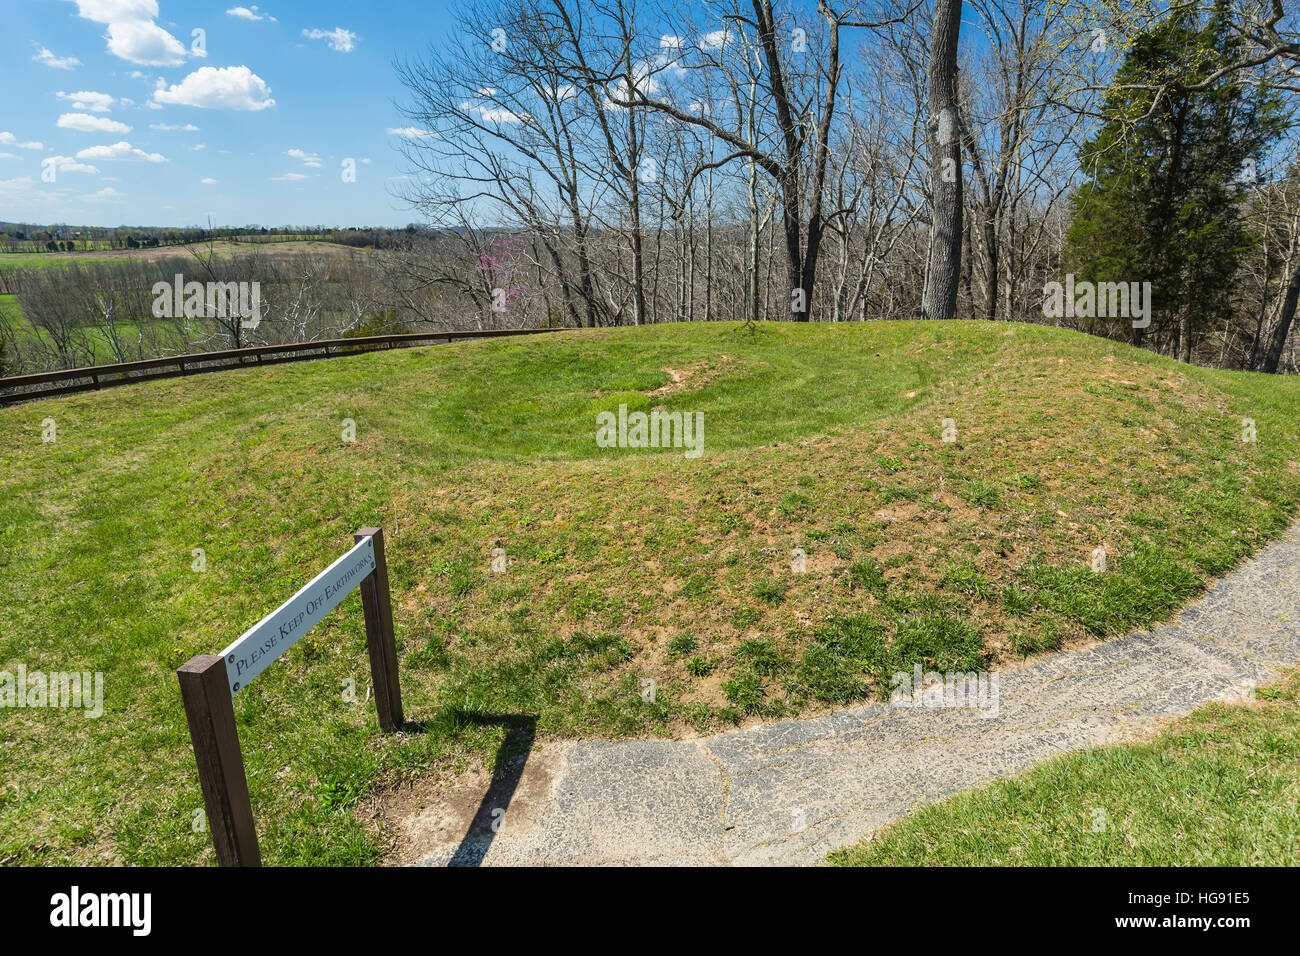 Detail of the Great Serpent Mound, which snakes about ¼ mile over the landscape at Serpent Mound State Memorial in Adams County, Ohio, USA Stock Photo